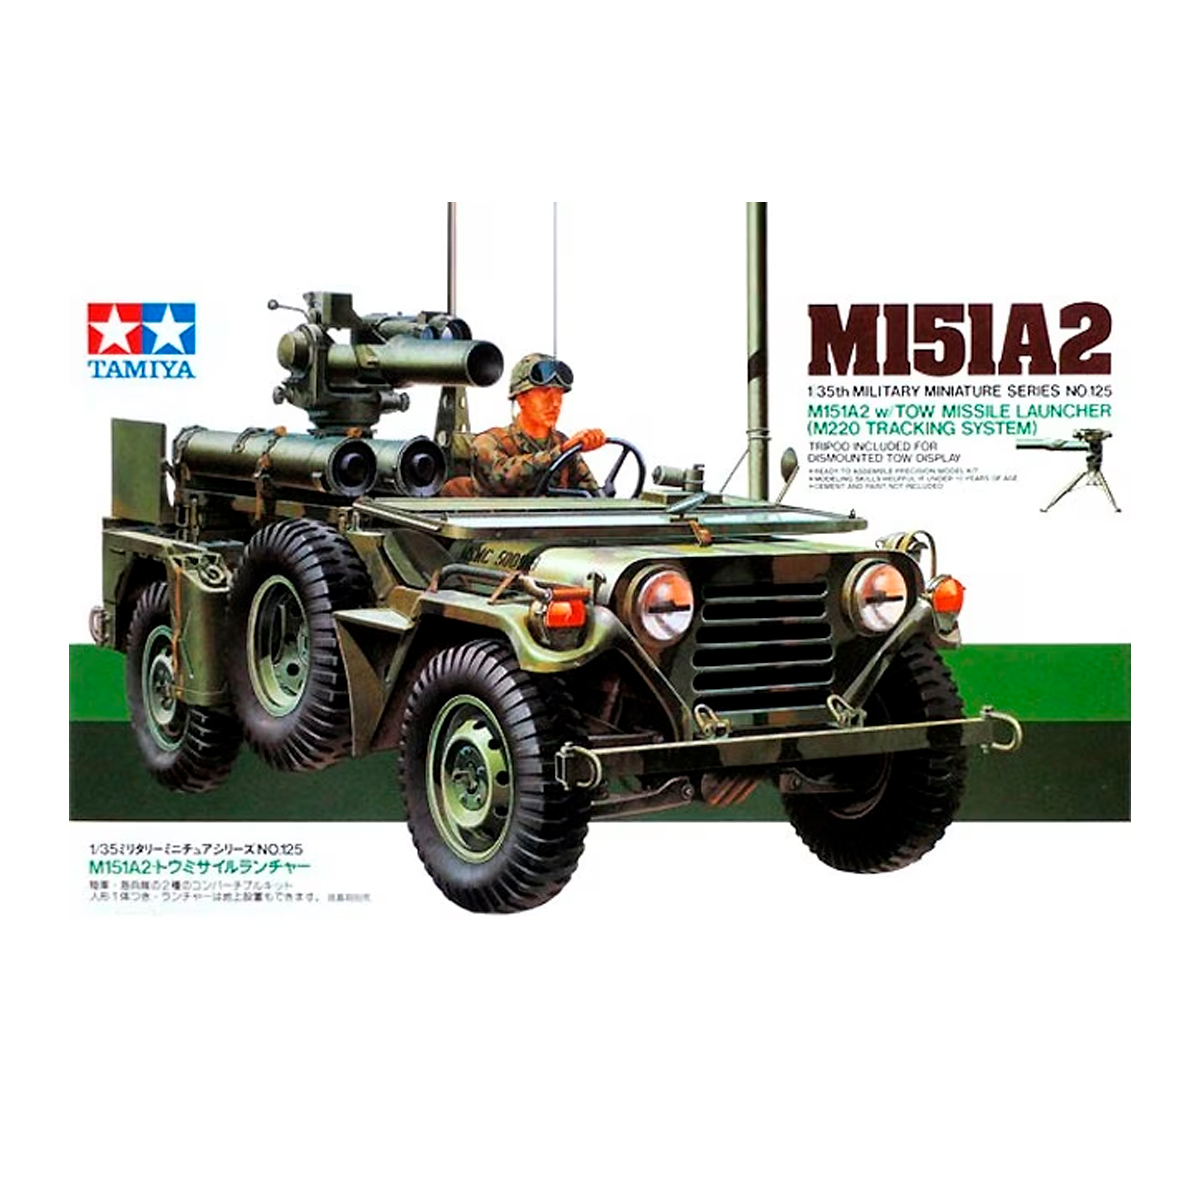 1/35 M151A2 w/Tow Missile